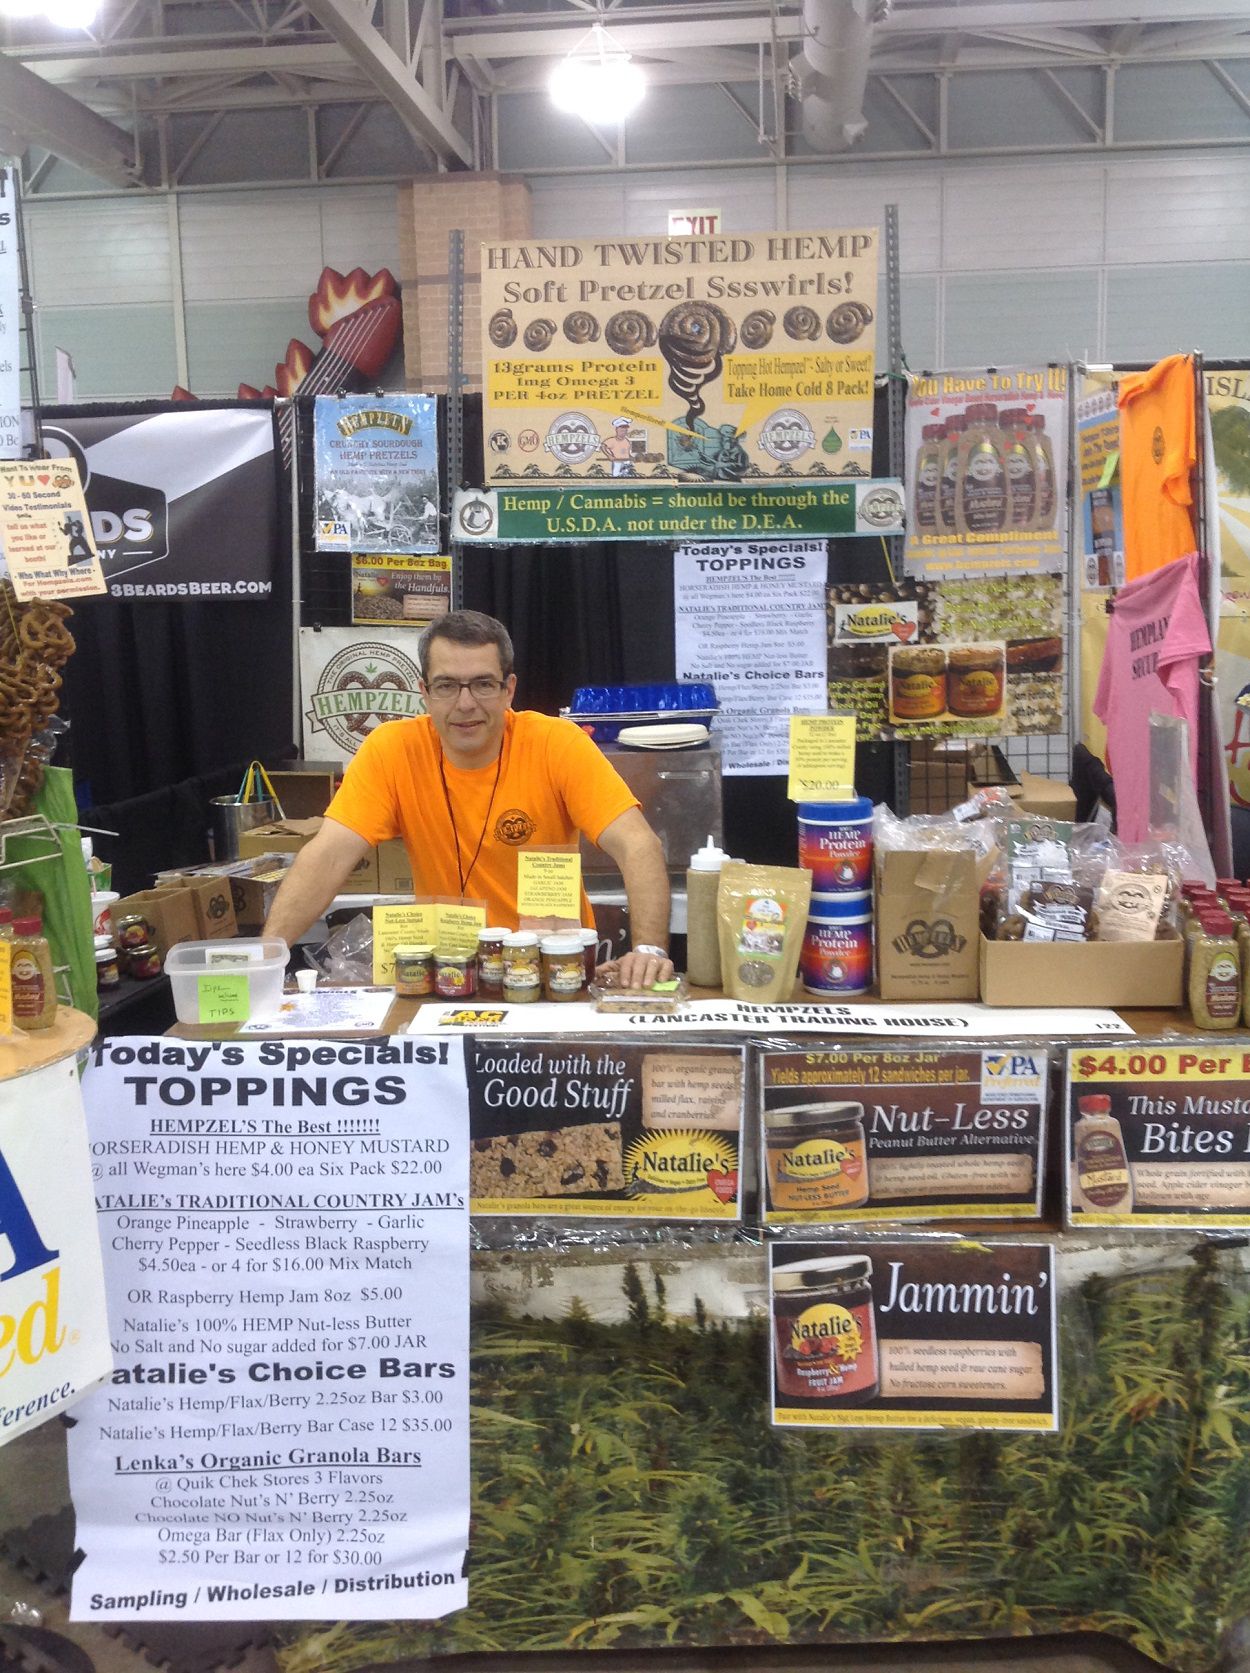 Owner Shawn in orange Hempzels(tm) tshirt with both hands on the counter in the booth with signs and products for sale.